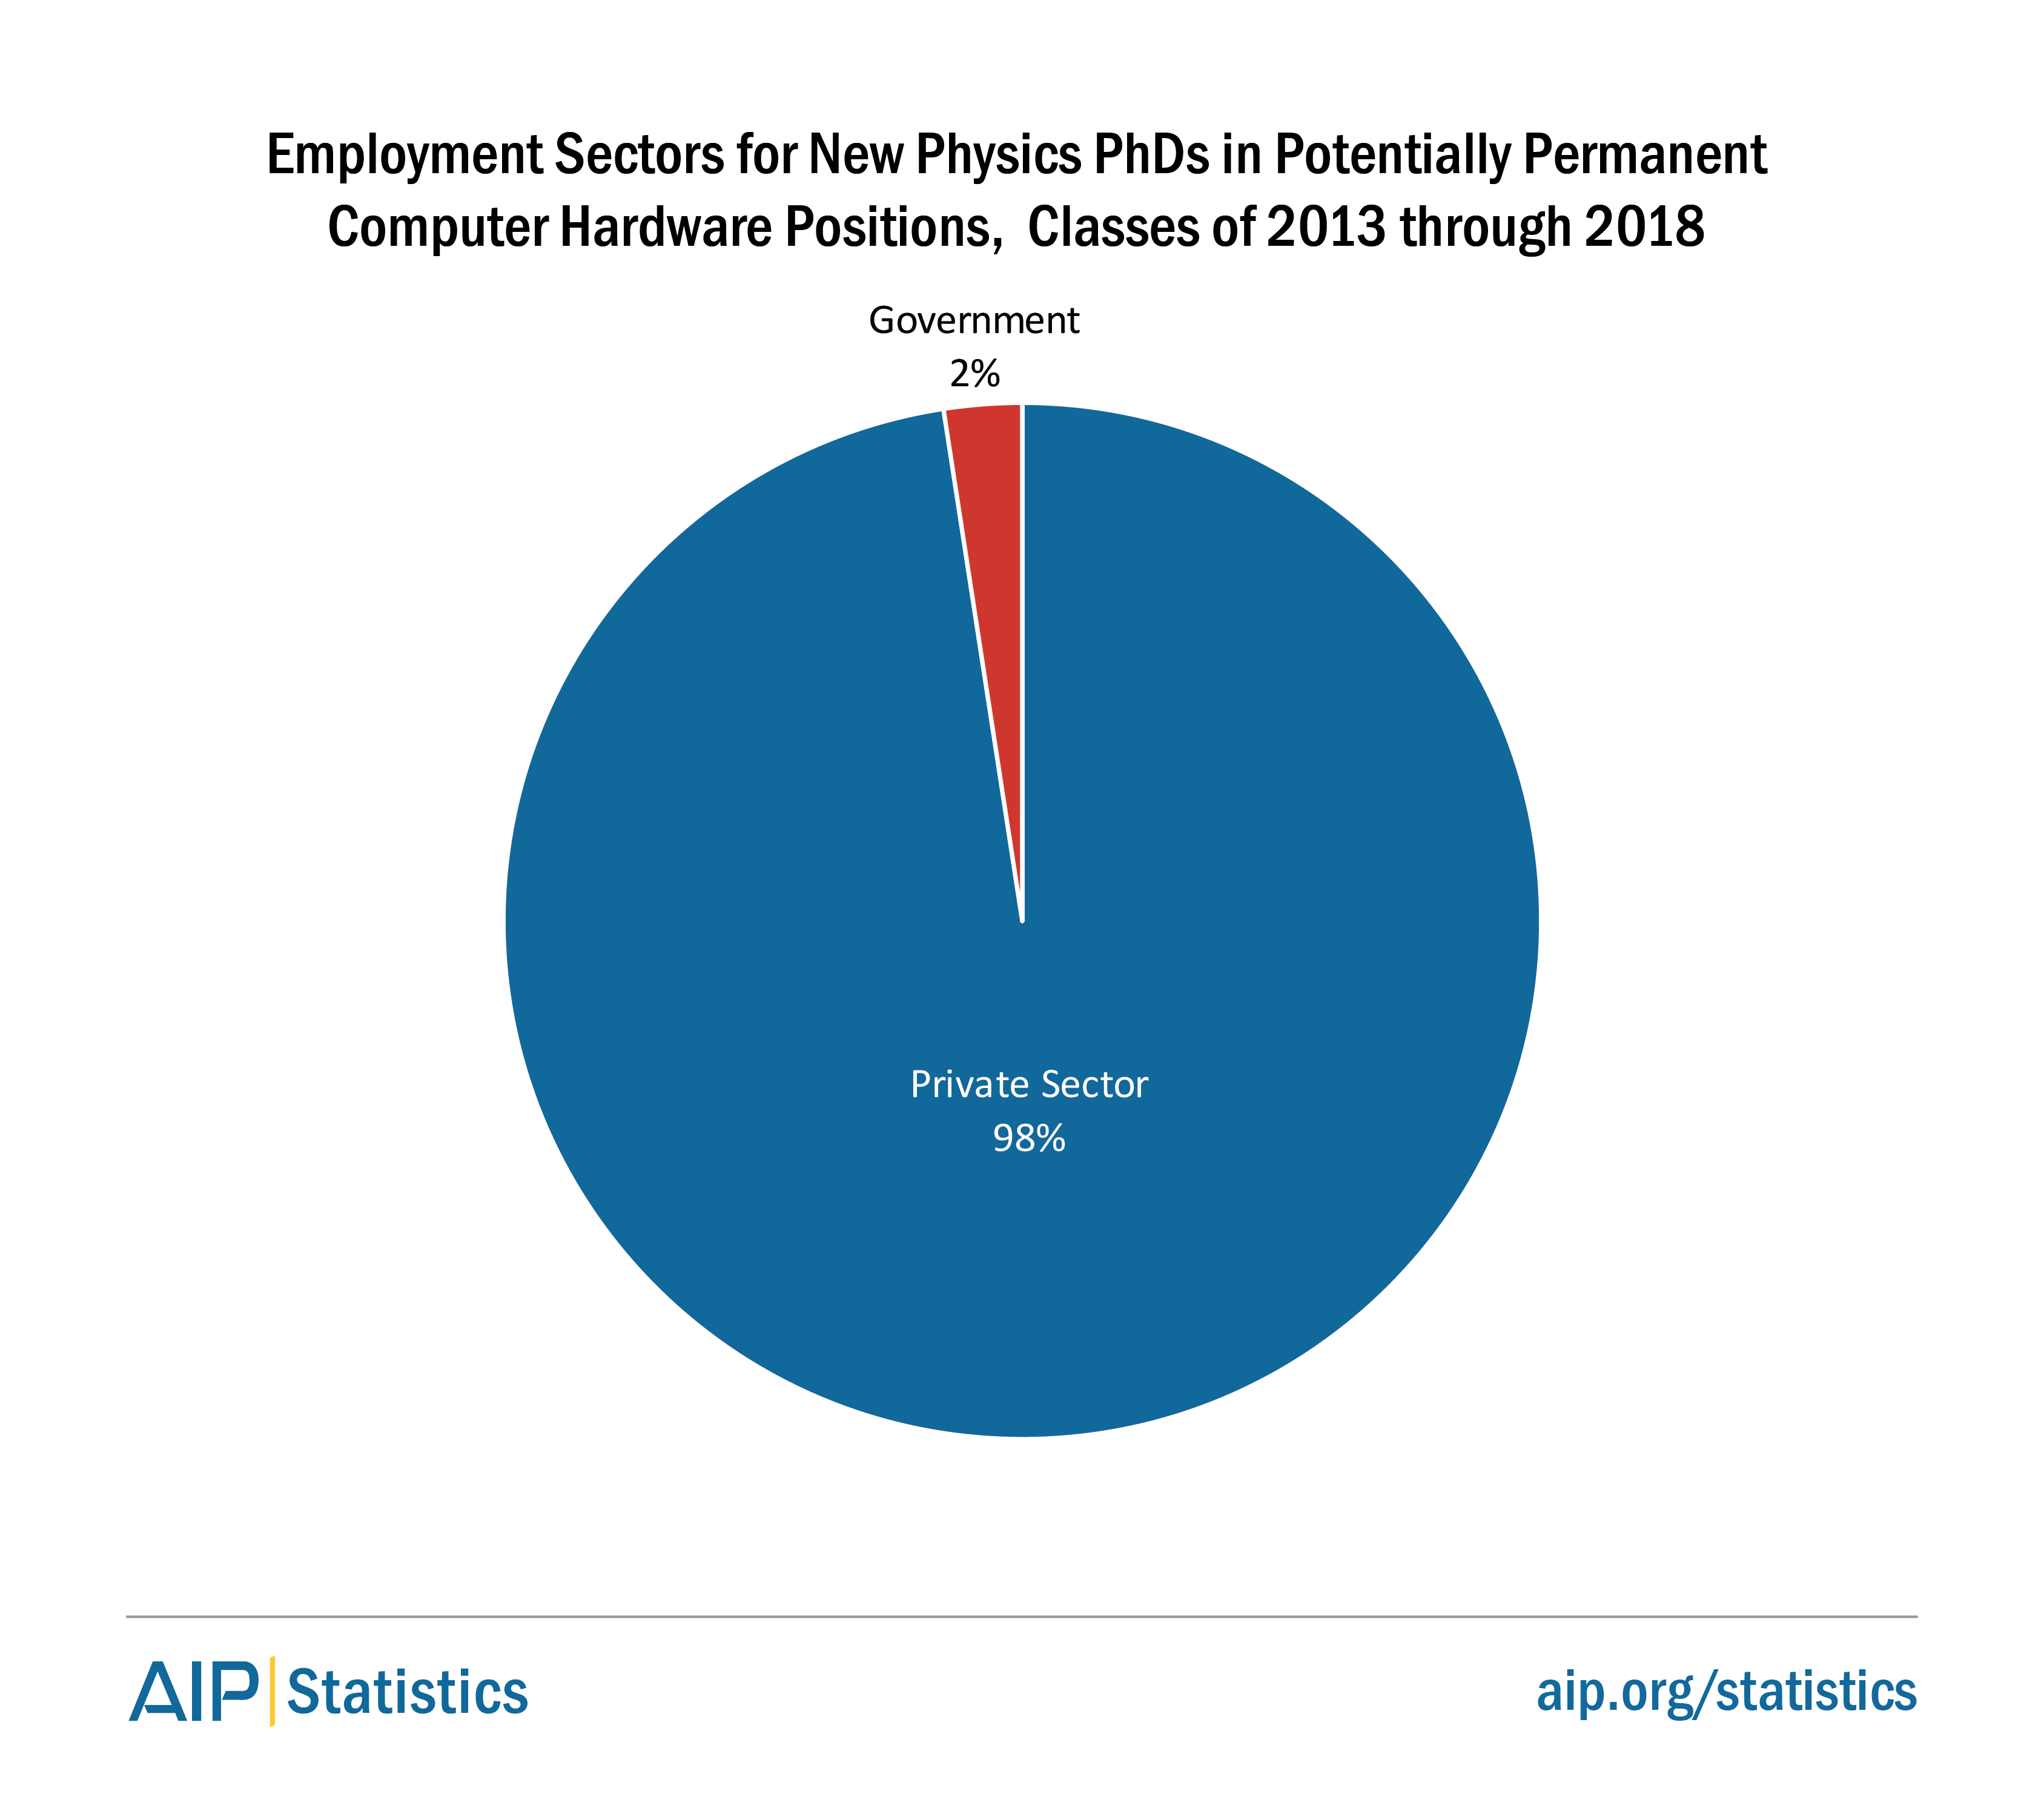 Employment Sectors for Physics PhDs in Computer Hardware Positions